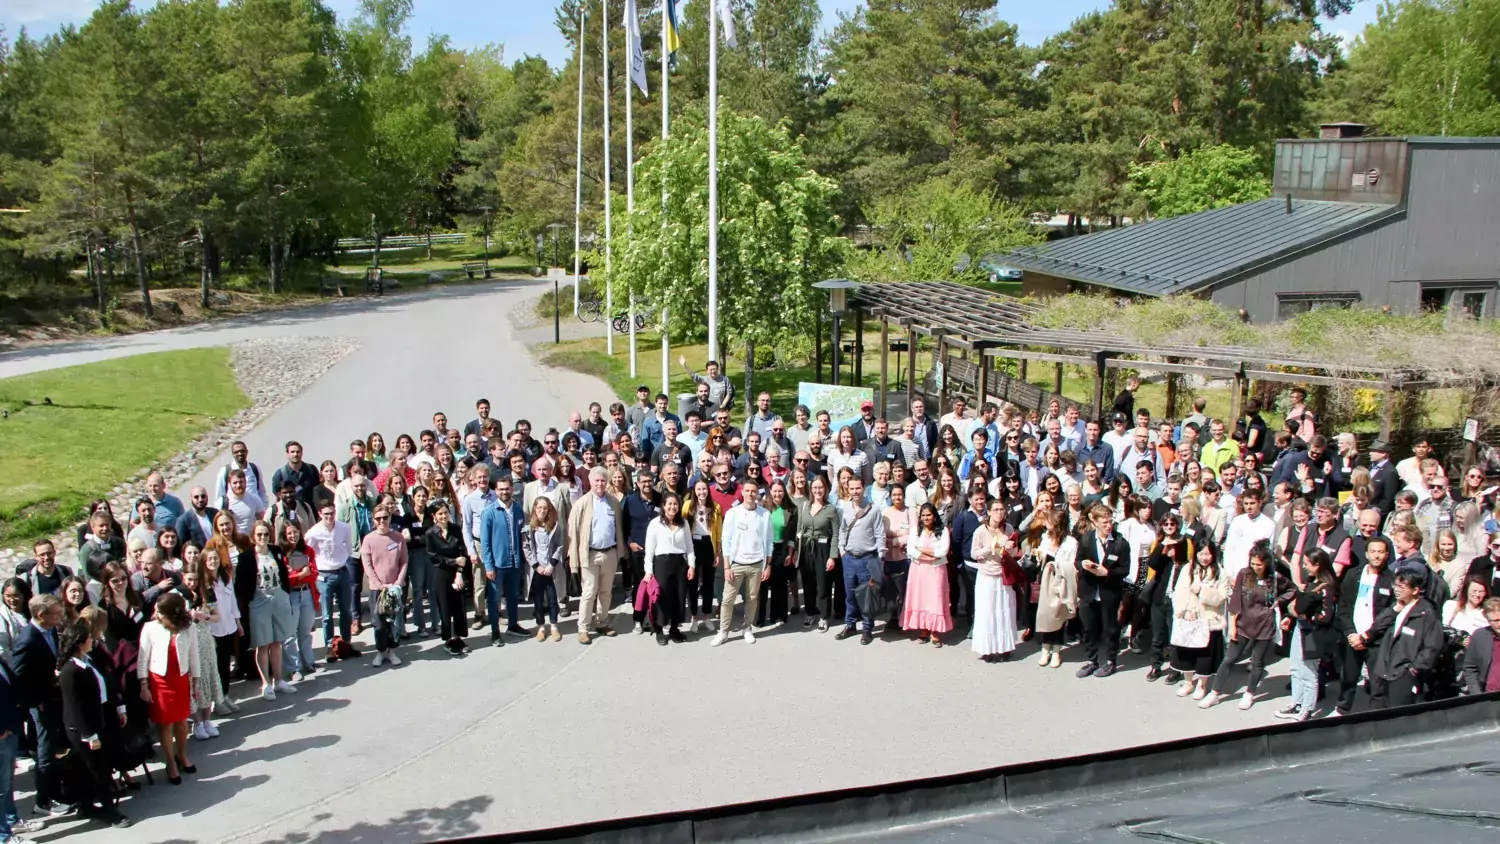 Group photo of attendees standing outside in a half circle.